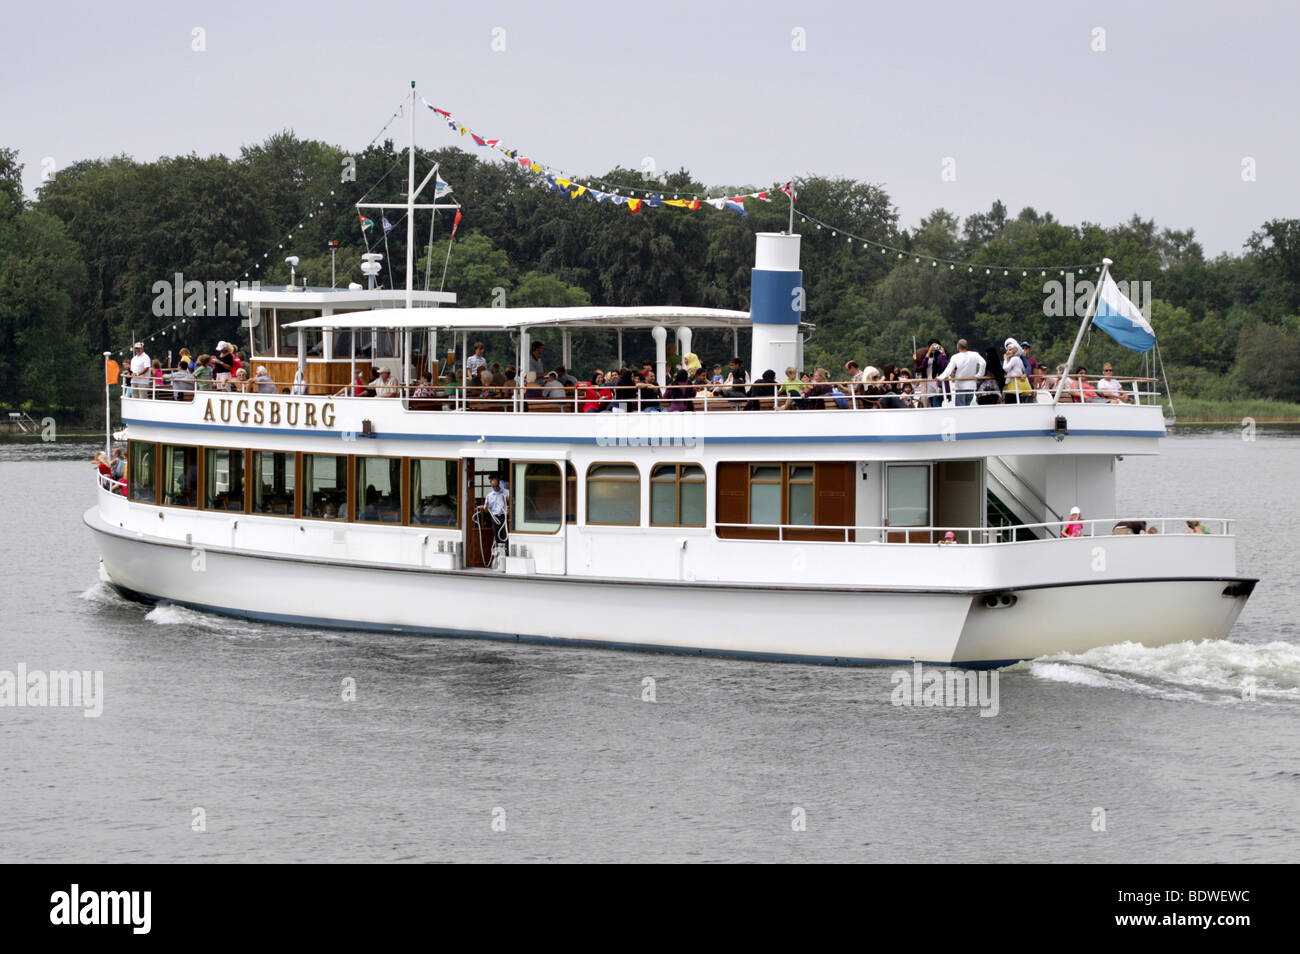 Tourist ship 'MS Augsburg' on the Ammersee lake, Bavaria, Germany, Europe Stock Photo